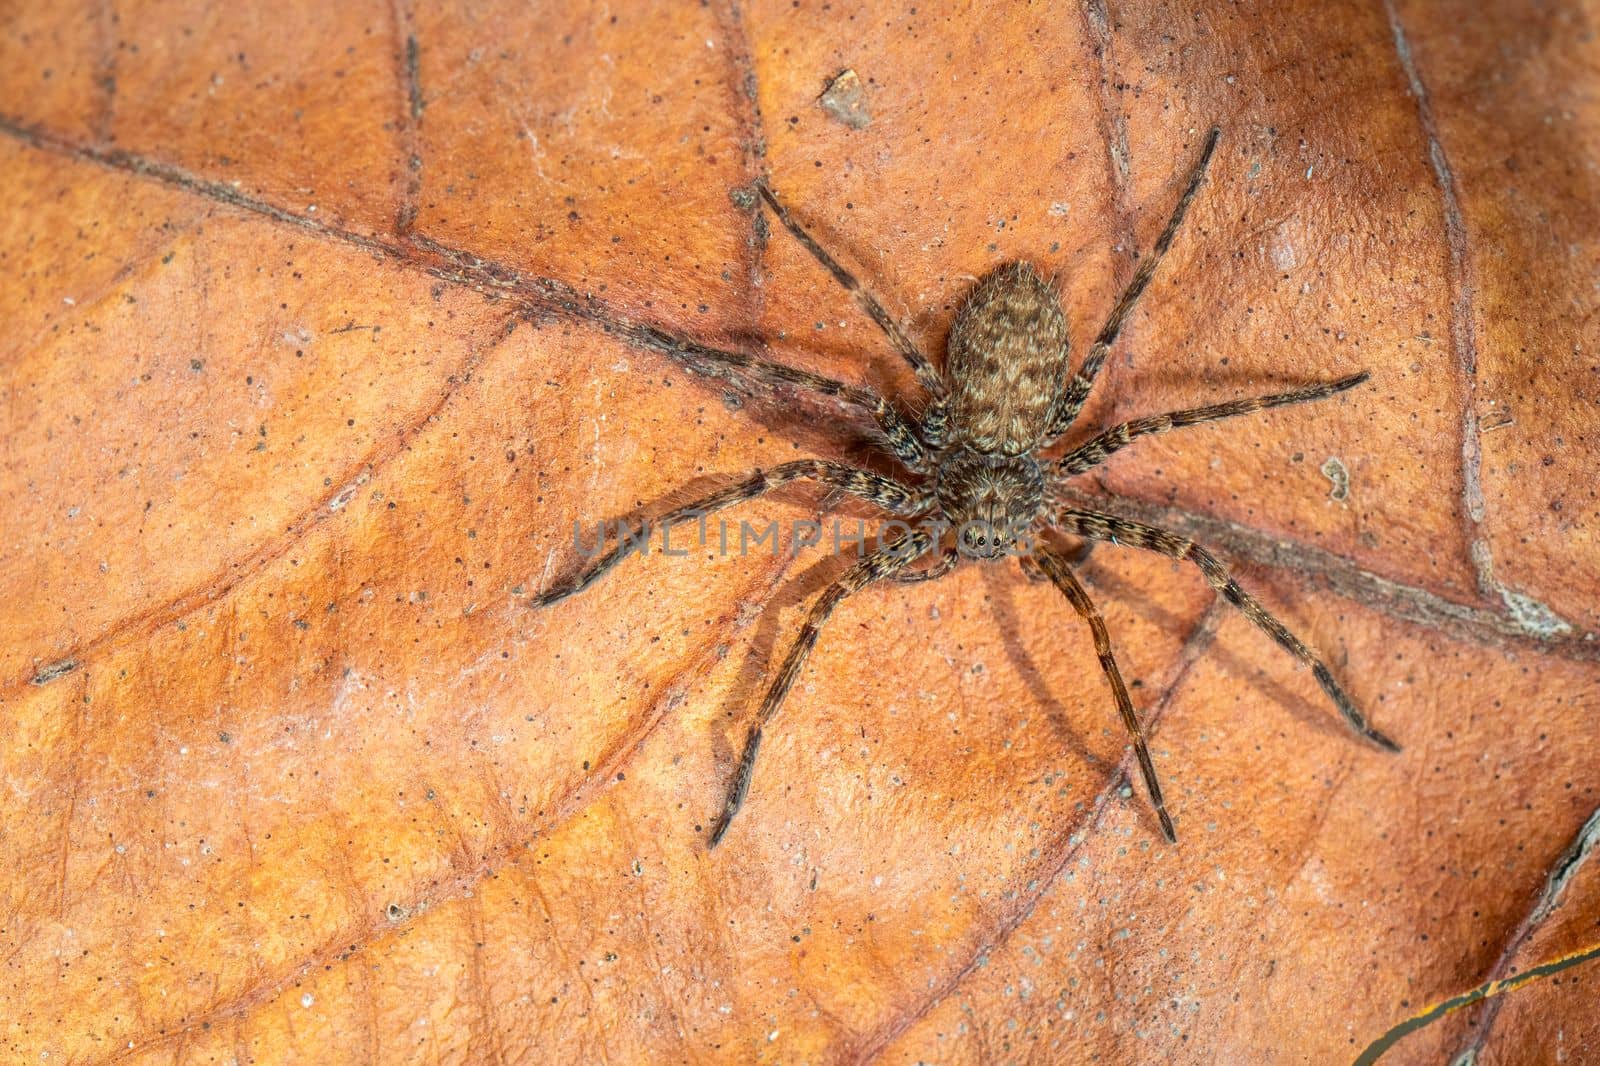 Image of a brown spider on dry leaves. Insect. Animal.